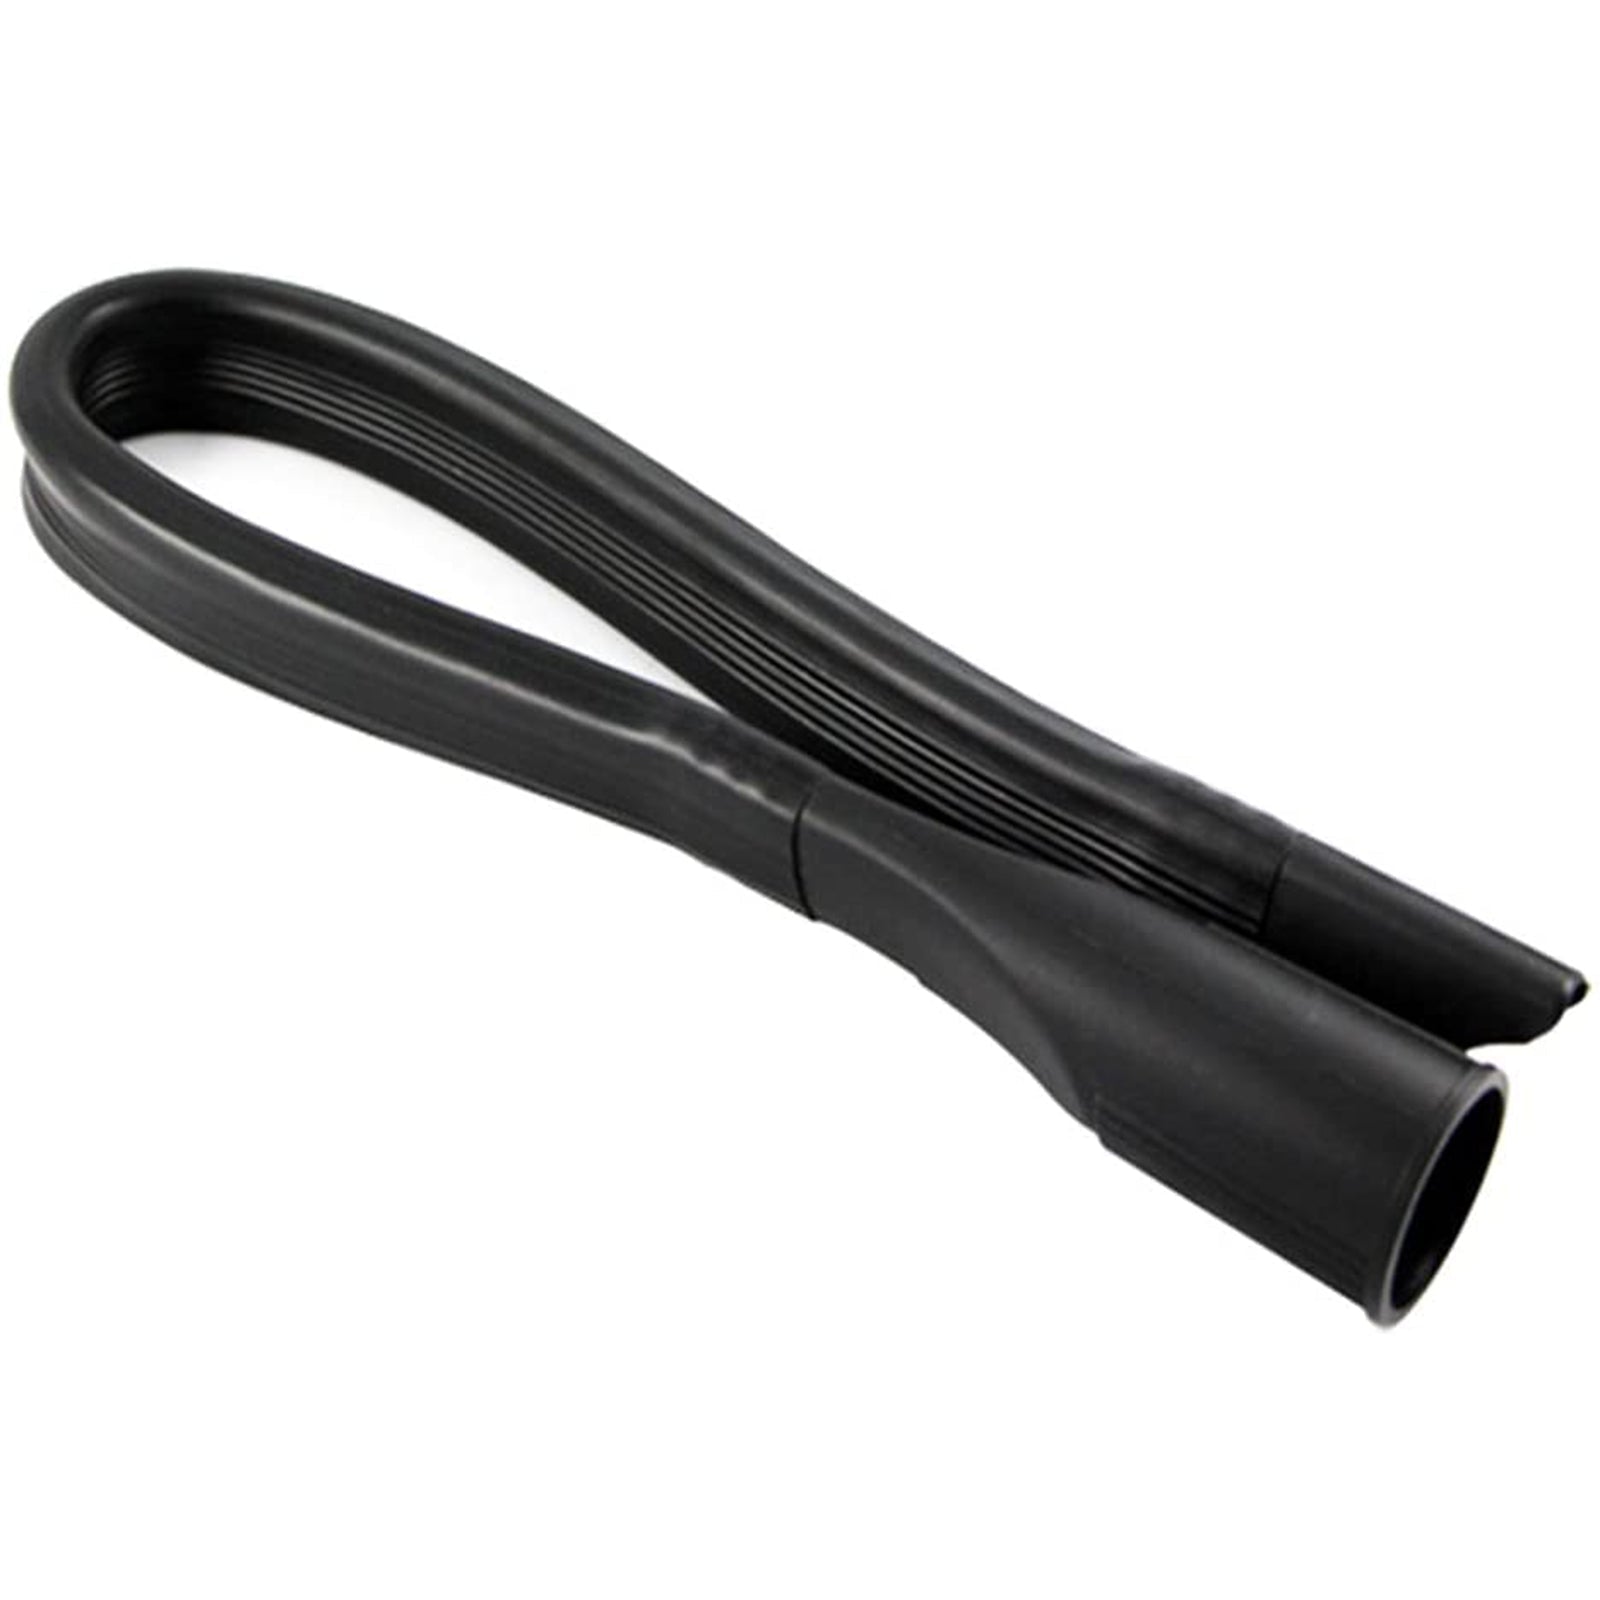 Flexible Crevice Tool Extra Long compatible with HOOVER Vacuum Cleaner (32mm)